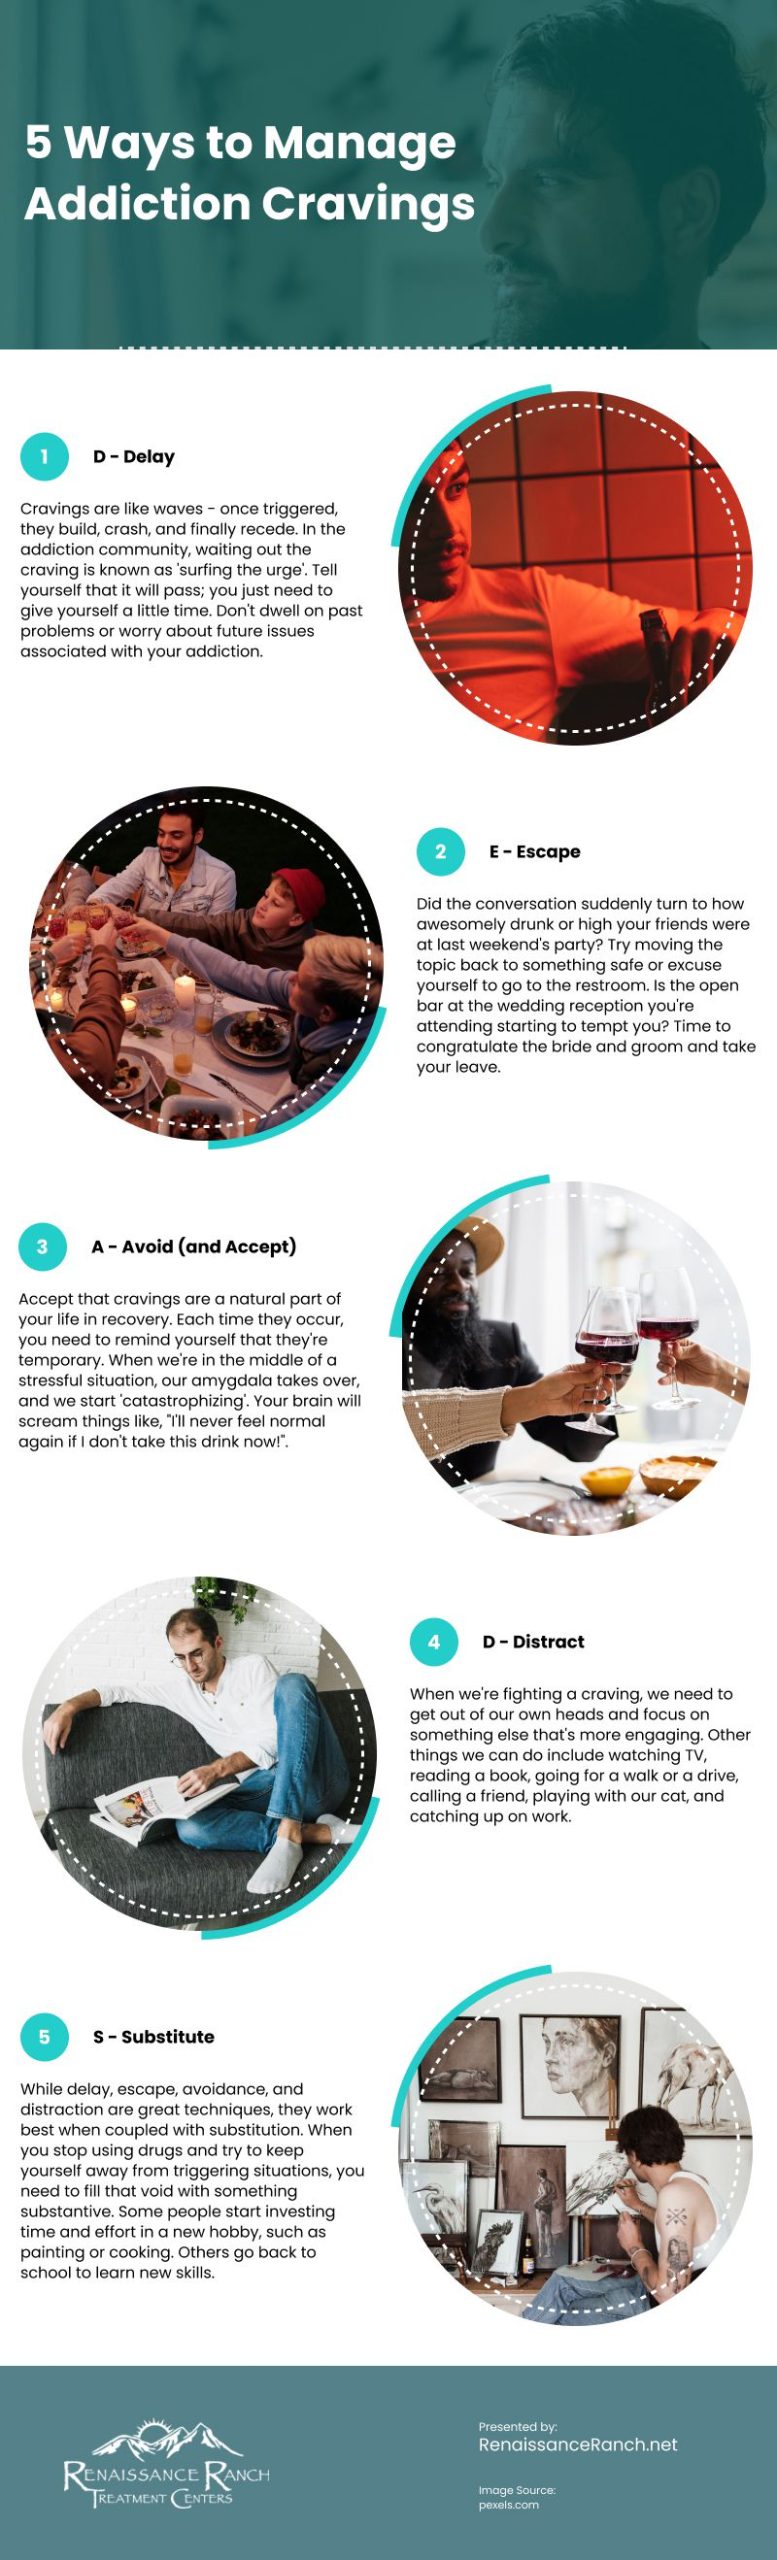 5 Ways to Manage Addiction Cravings Infographic